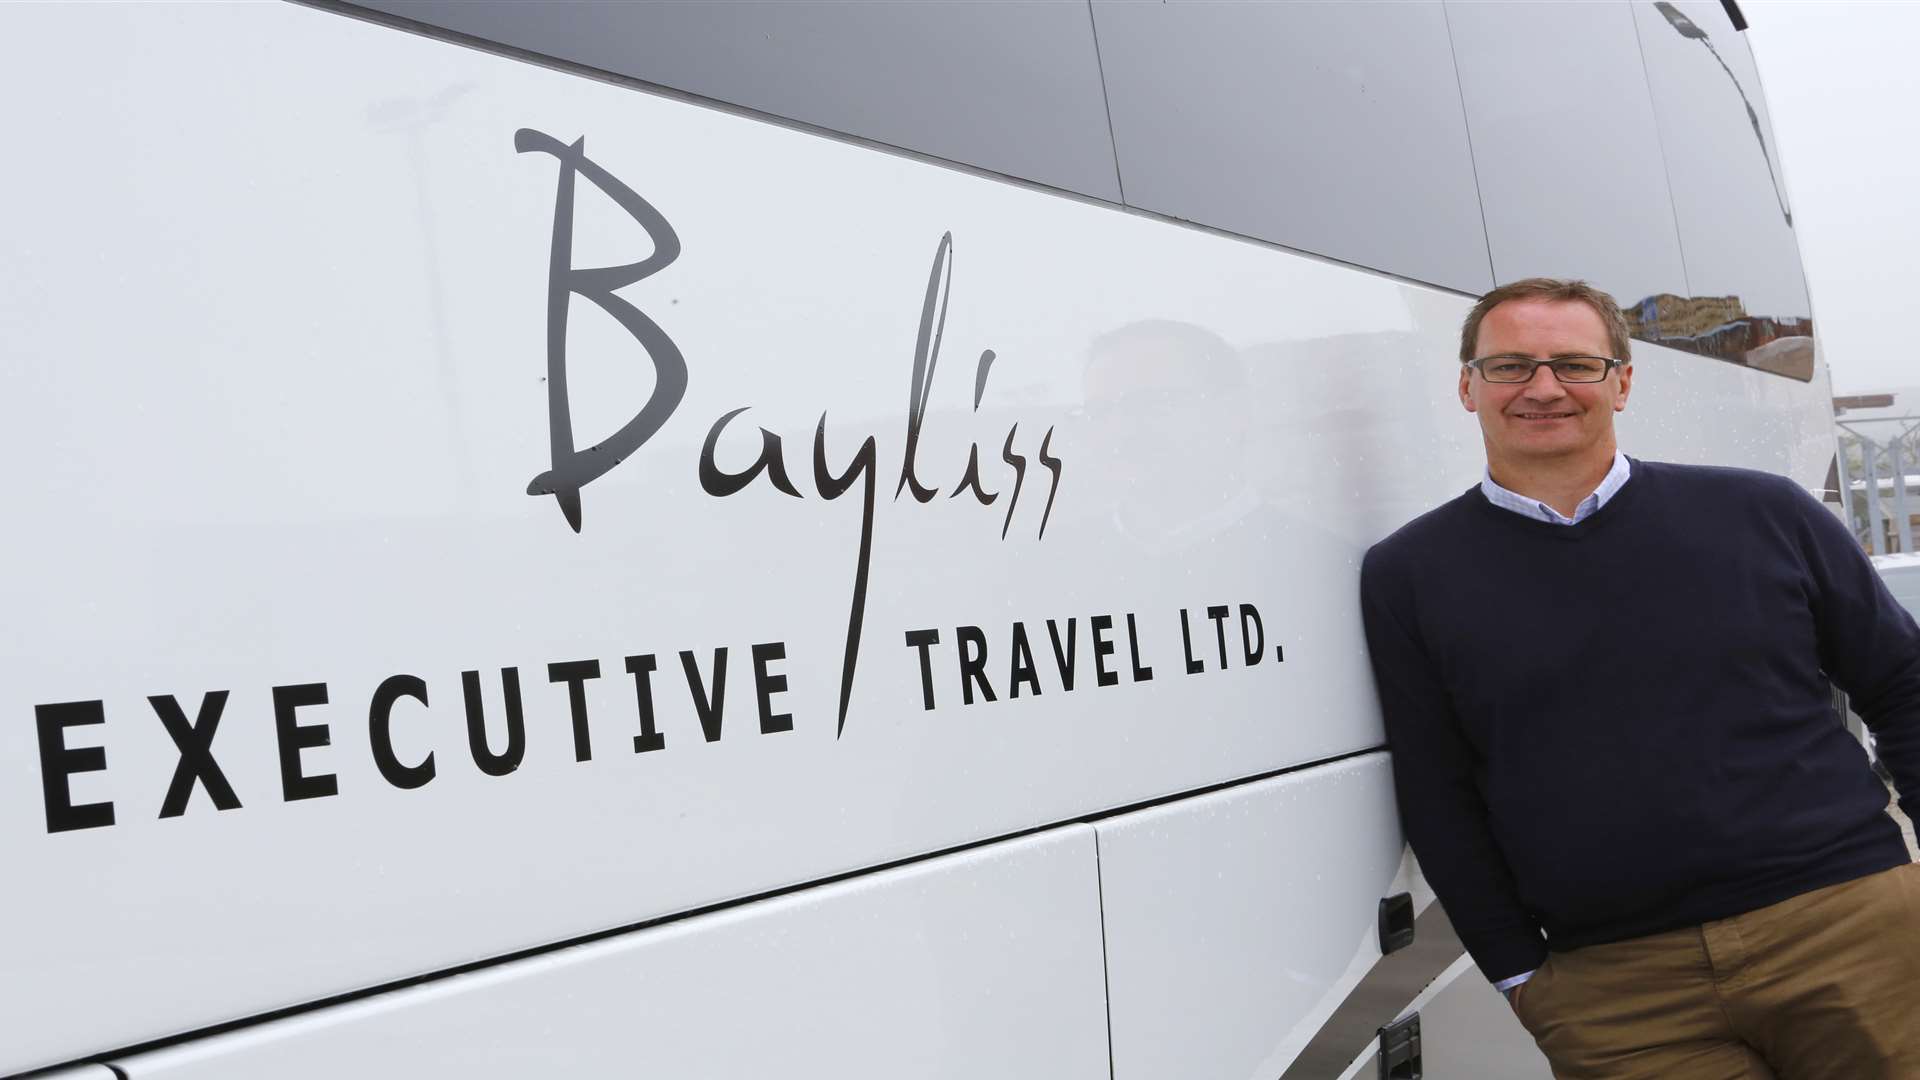 Bayliss Executive Travel is offering free lifts to the elderly